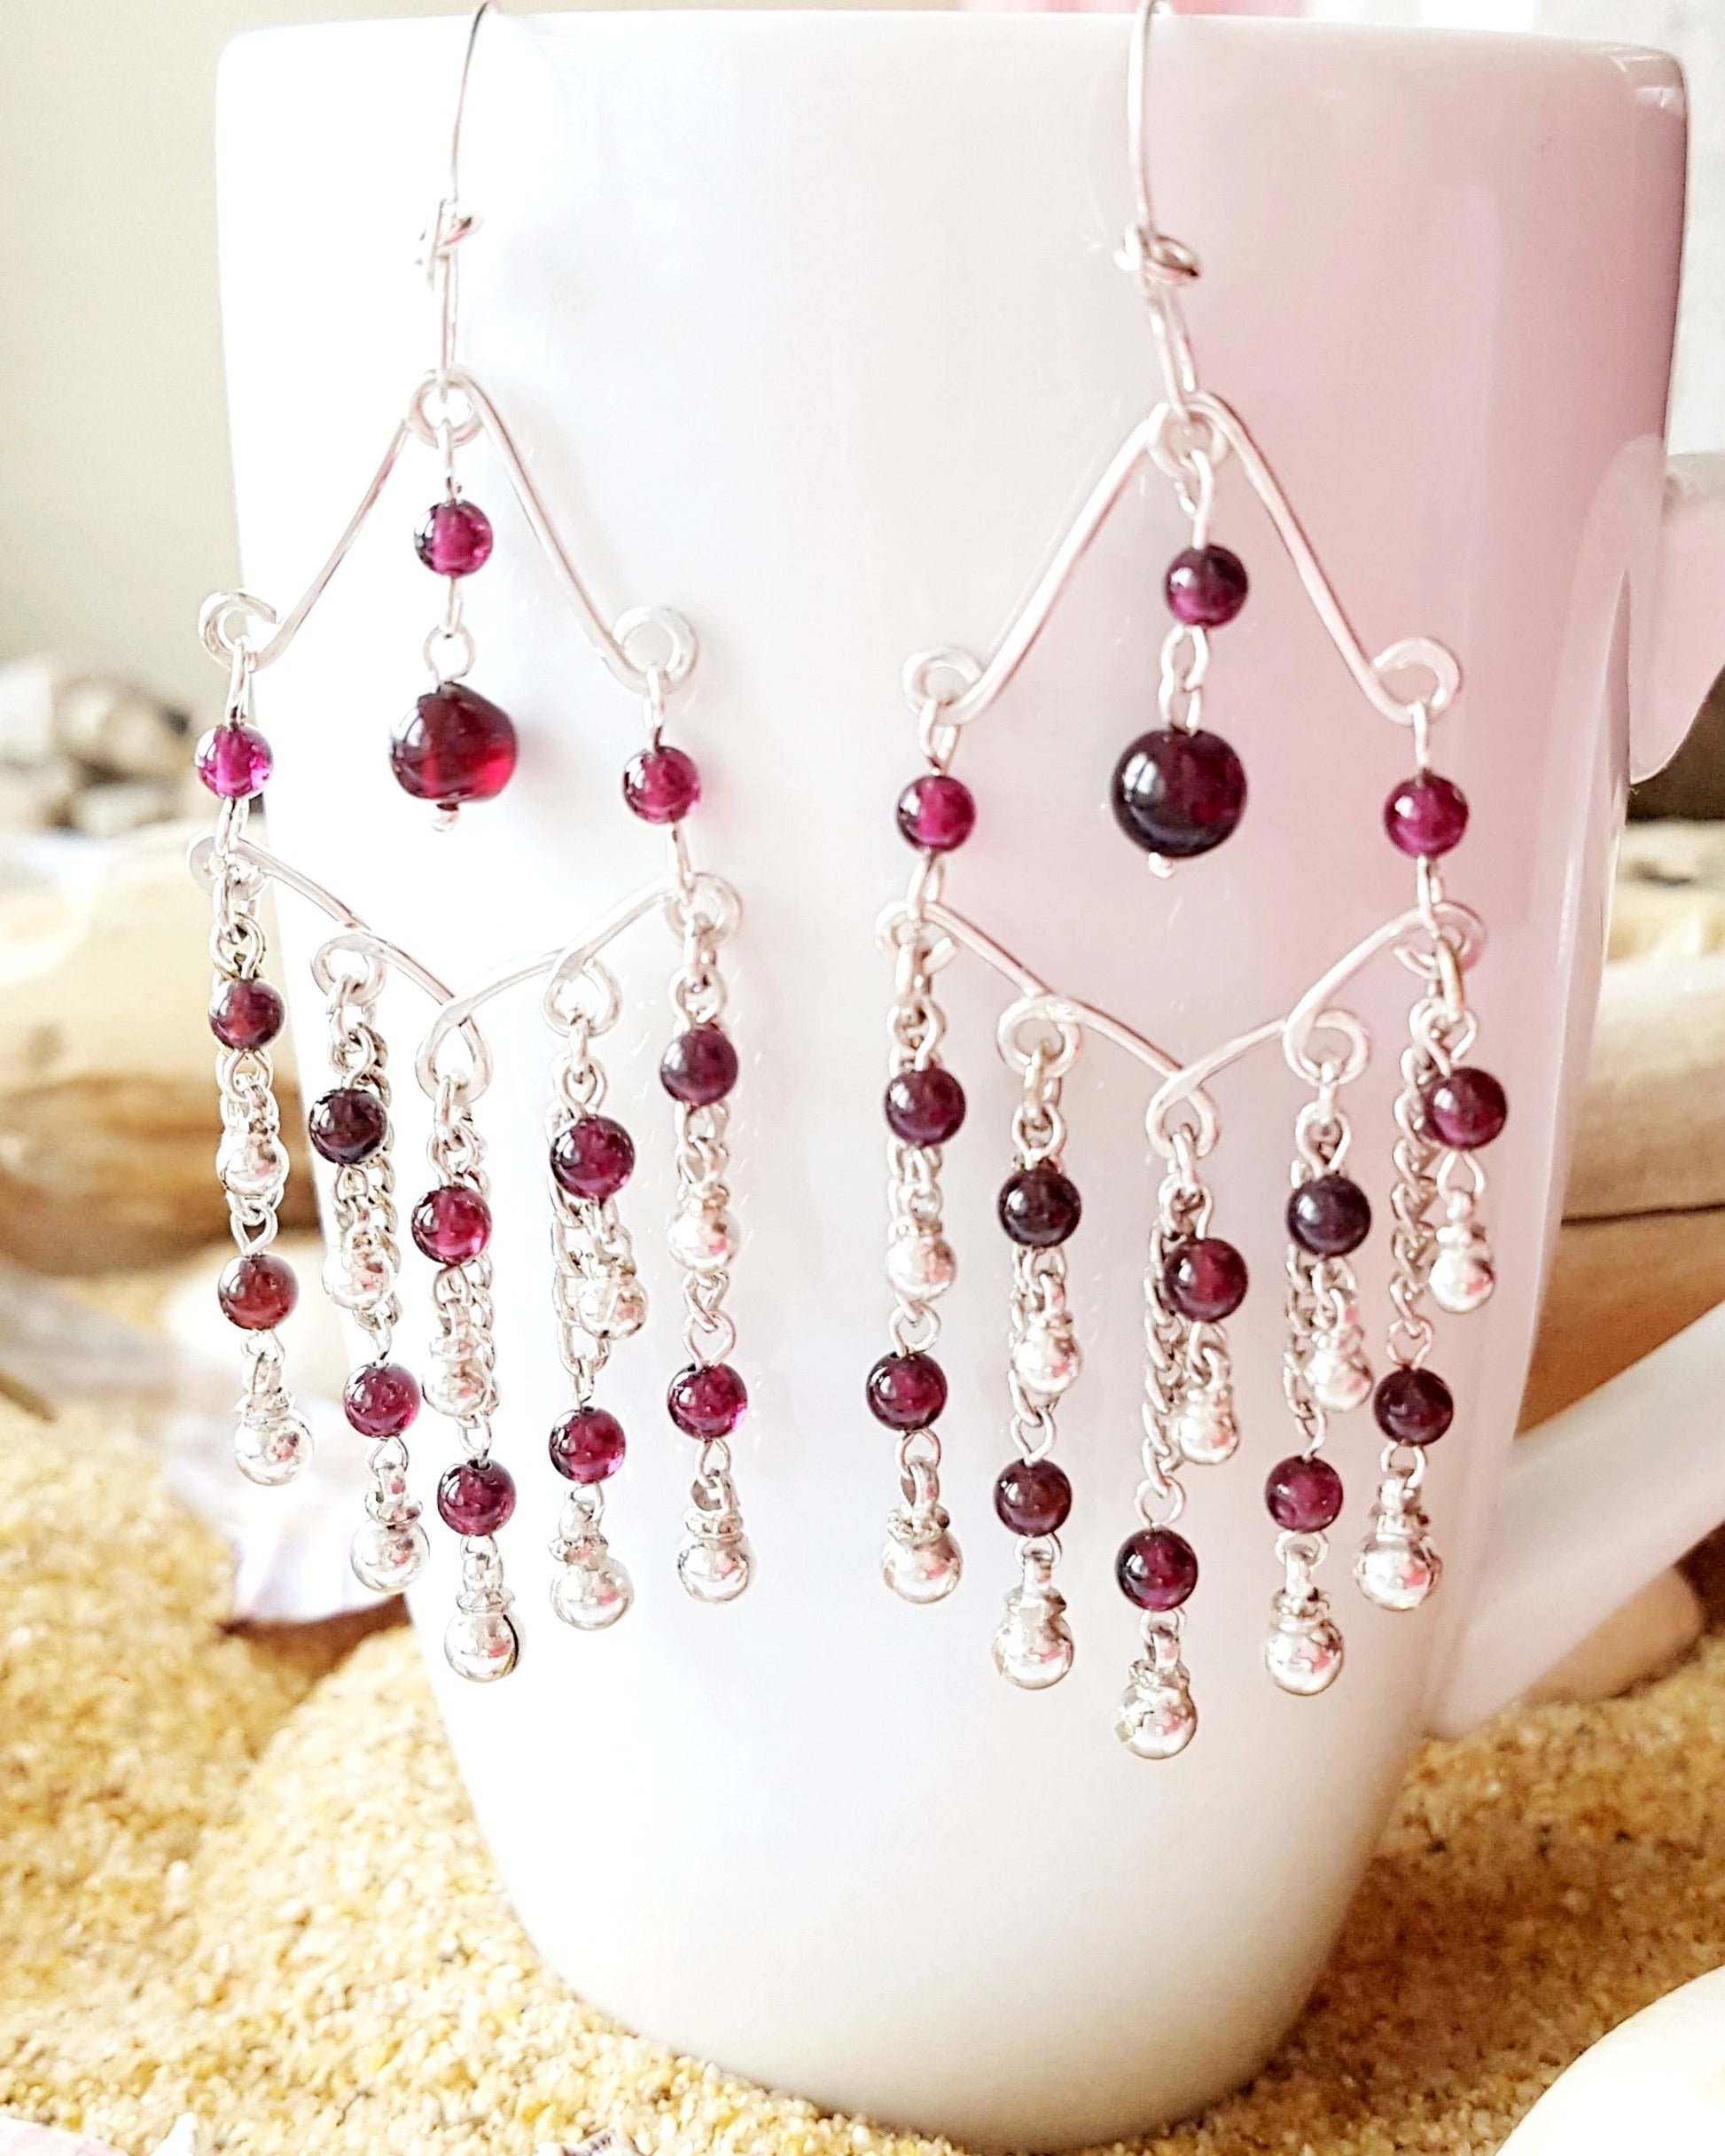   Long, Elaborate Garnet Chandelier Earrings made with Upcycled Vintage Sterling Silver and new.